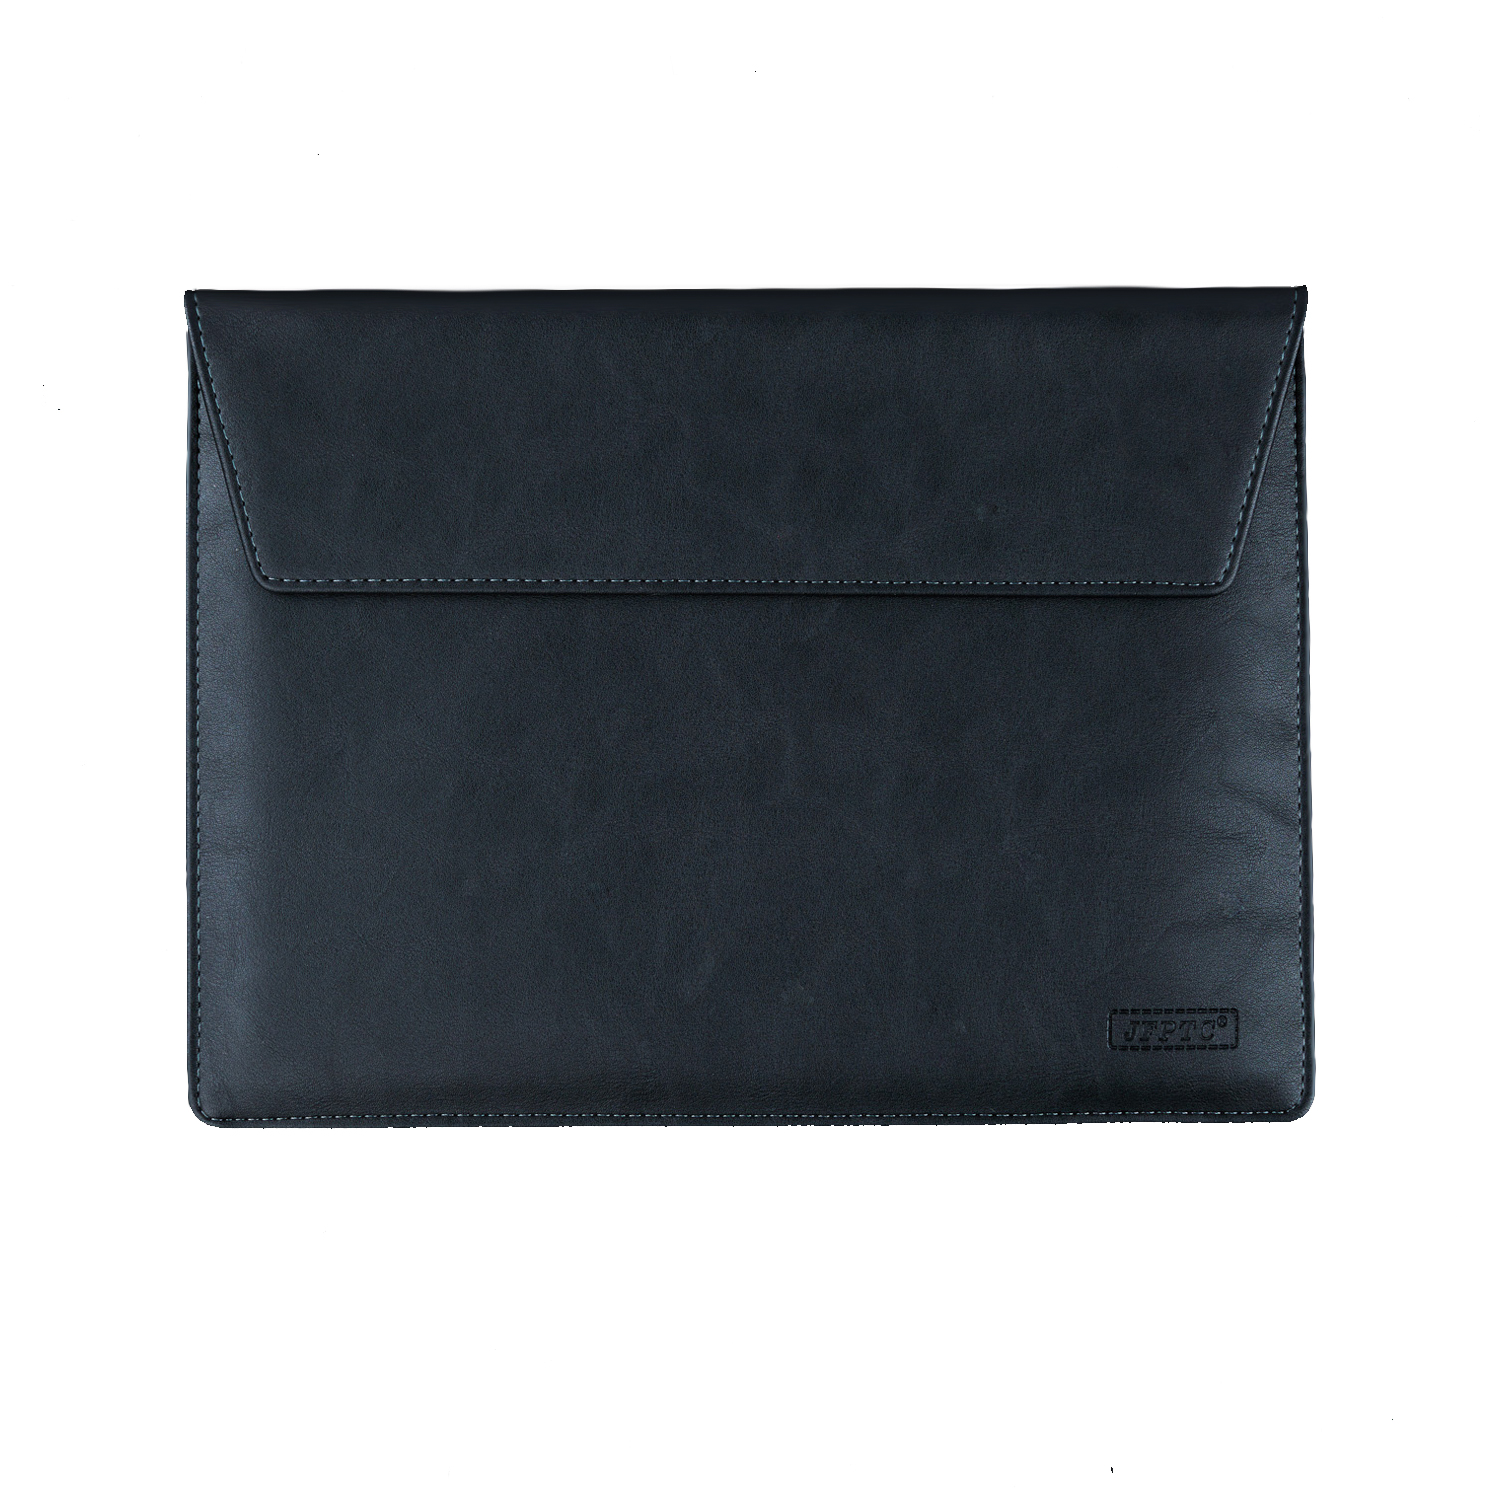 Soft PU Leather Sleeve Case Bag For 13 - 13.3 Inch Laptop/ Notebook/ MacBook/ Ultrabook/ Chromebook Computers (Apple/ Acer/ Asus/ Dell/ Fujitsu/ Lenovo/ HP/ Samsung/ Sony/ Toshiba etc), Black - image 4 of 6